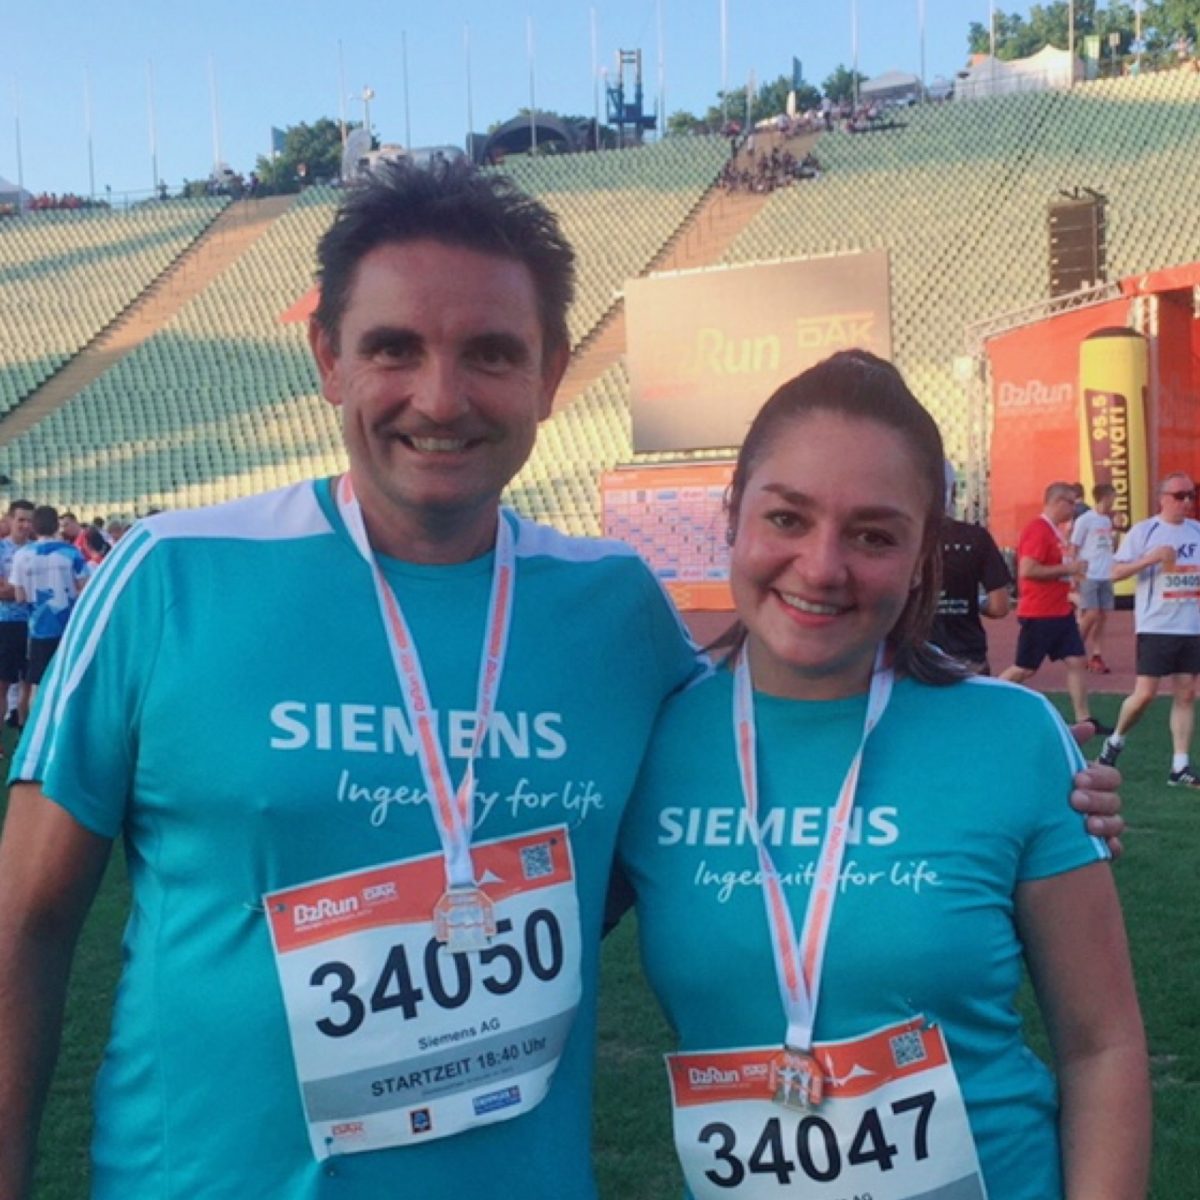 TUM alumni Andreas Talg and Ángela Párraga after participating in a running event for companies.